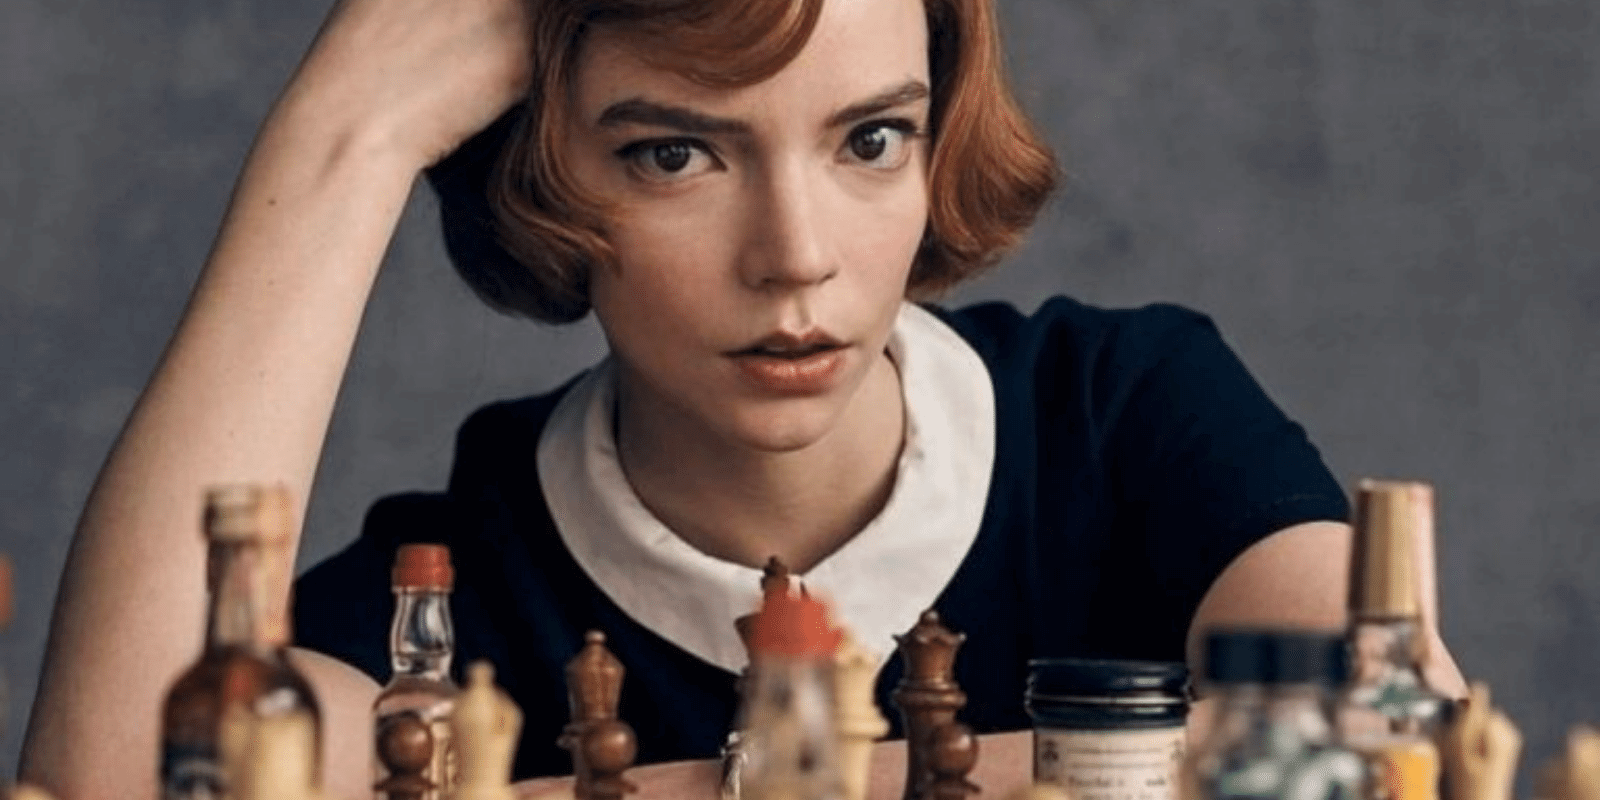 Beth vs 12 Players, Simul Chess Scene, The Queen's Gambit